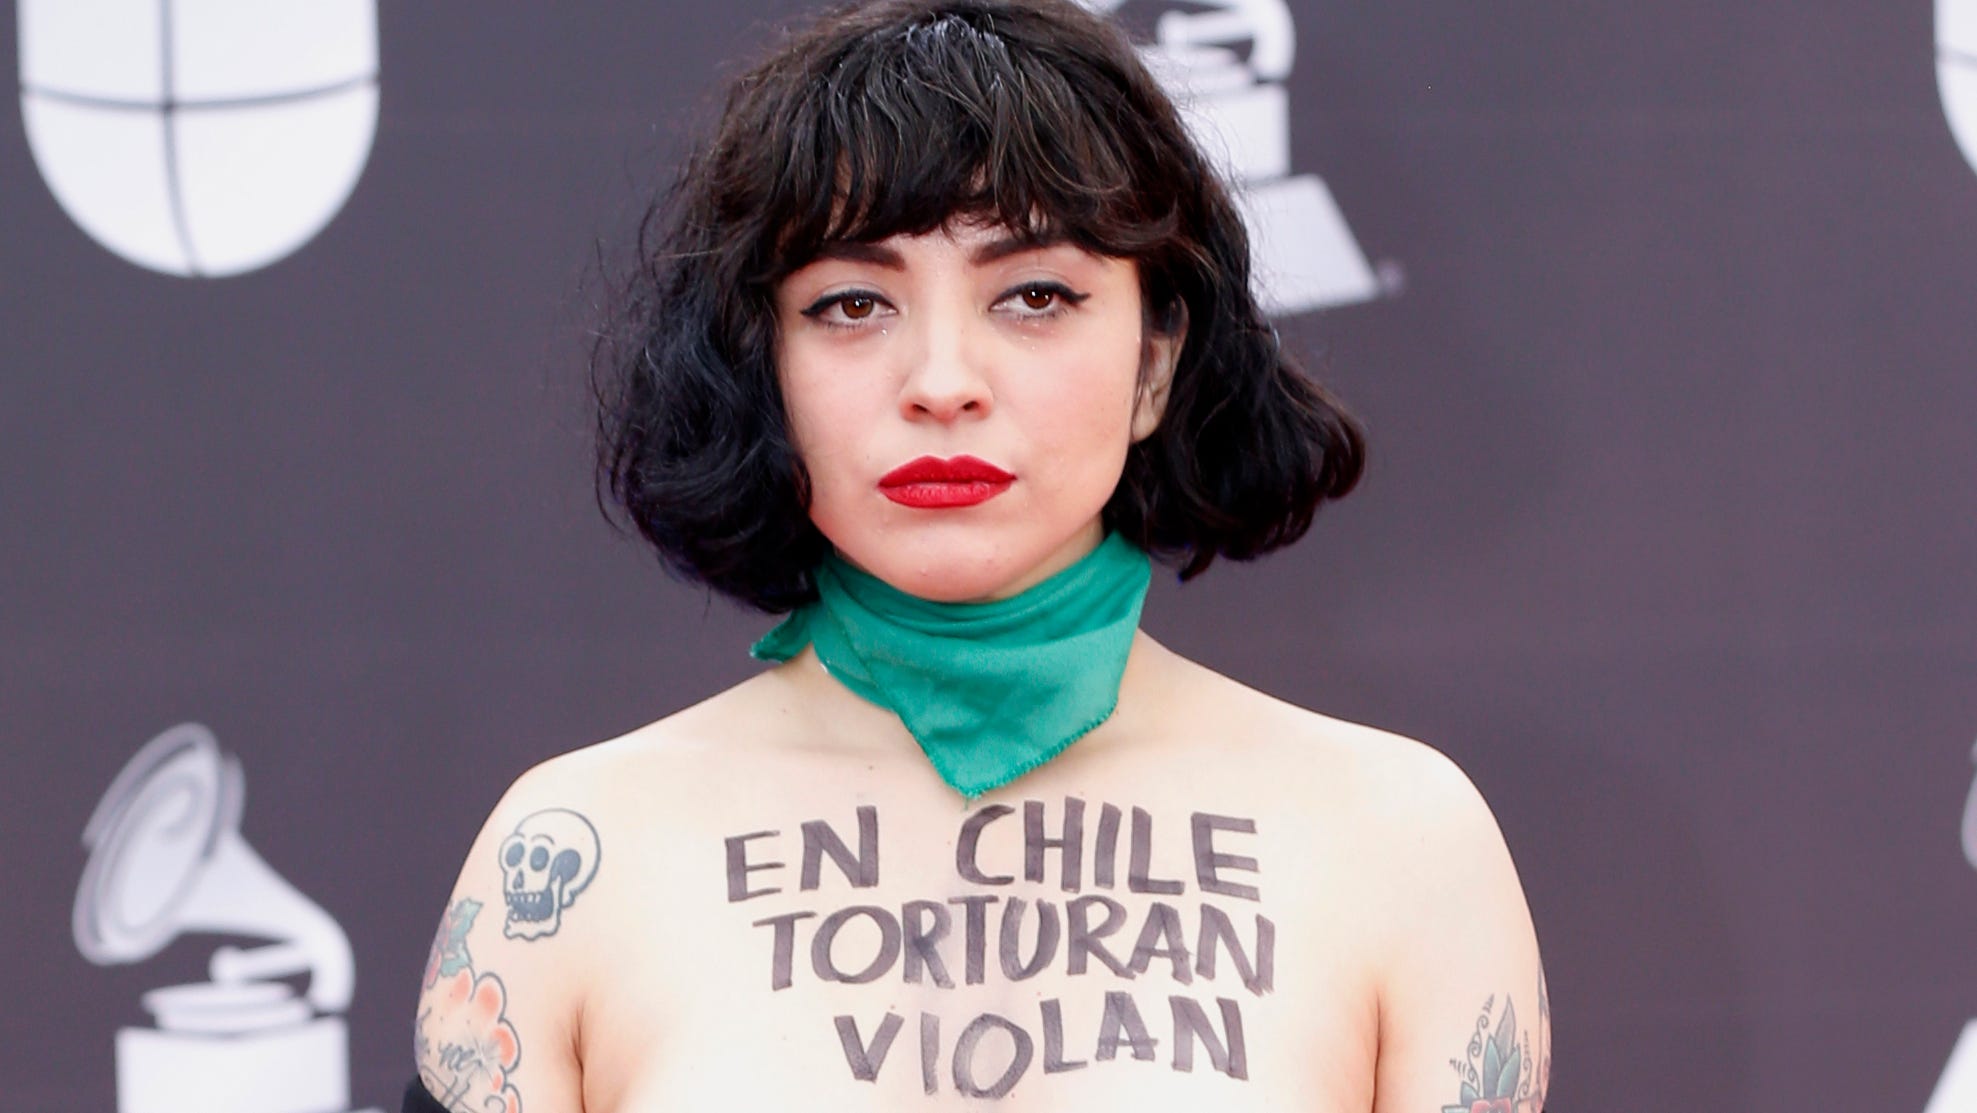 Latin Grammys Mon Laferte Exposes Bare Chest In Political Protest